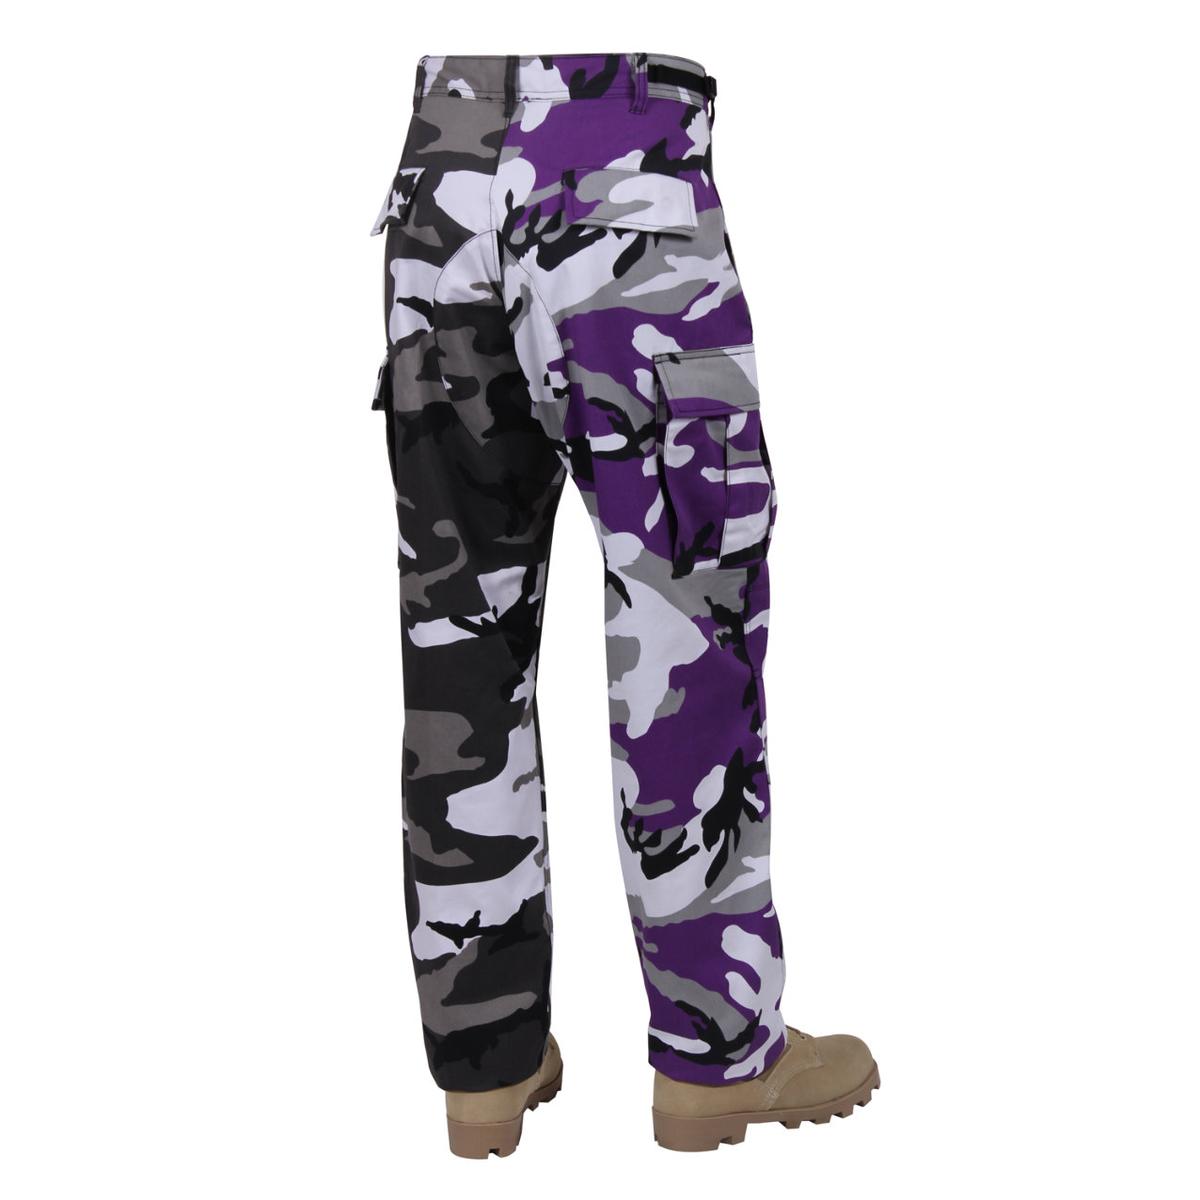 Rothco Two-Tone Camouflage Tactical BDU Cargo Pants | eBay